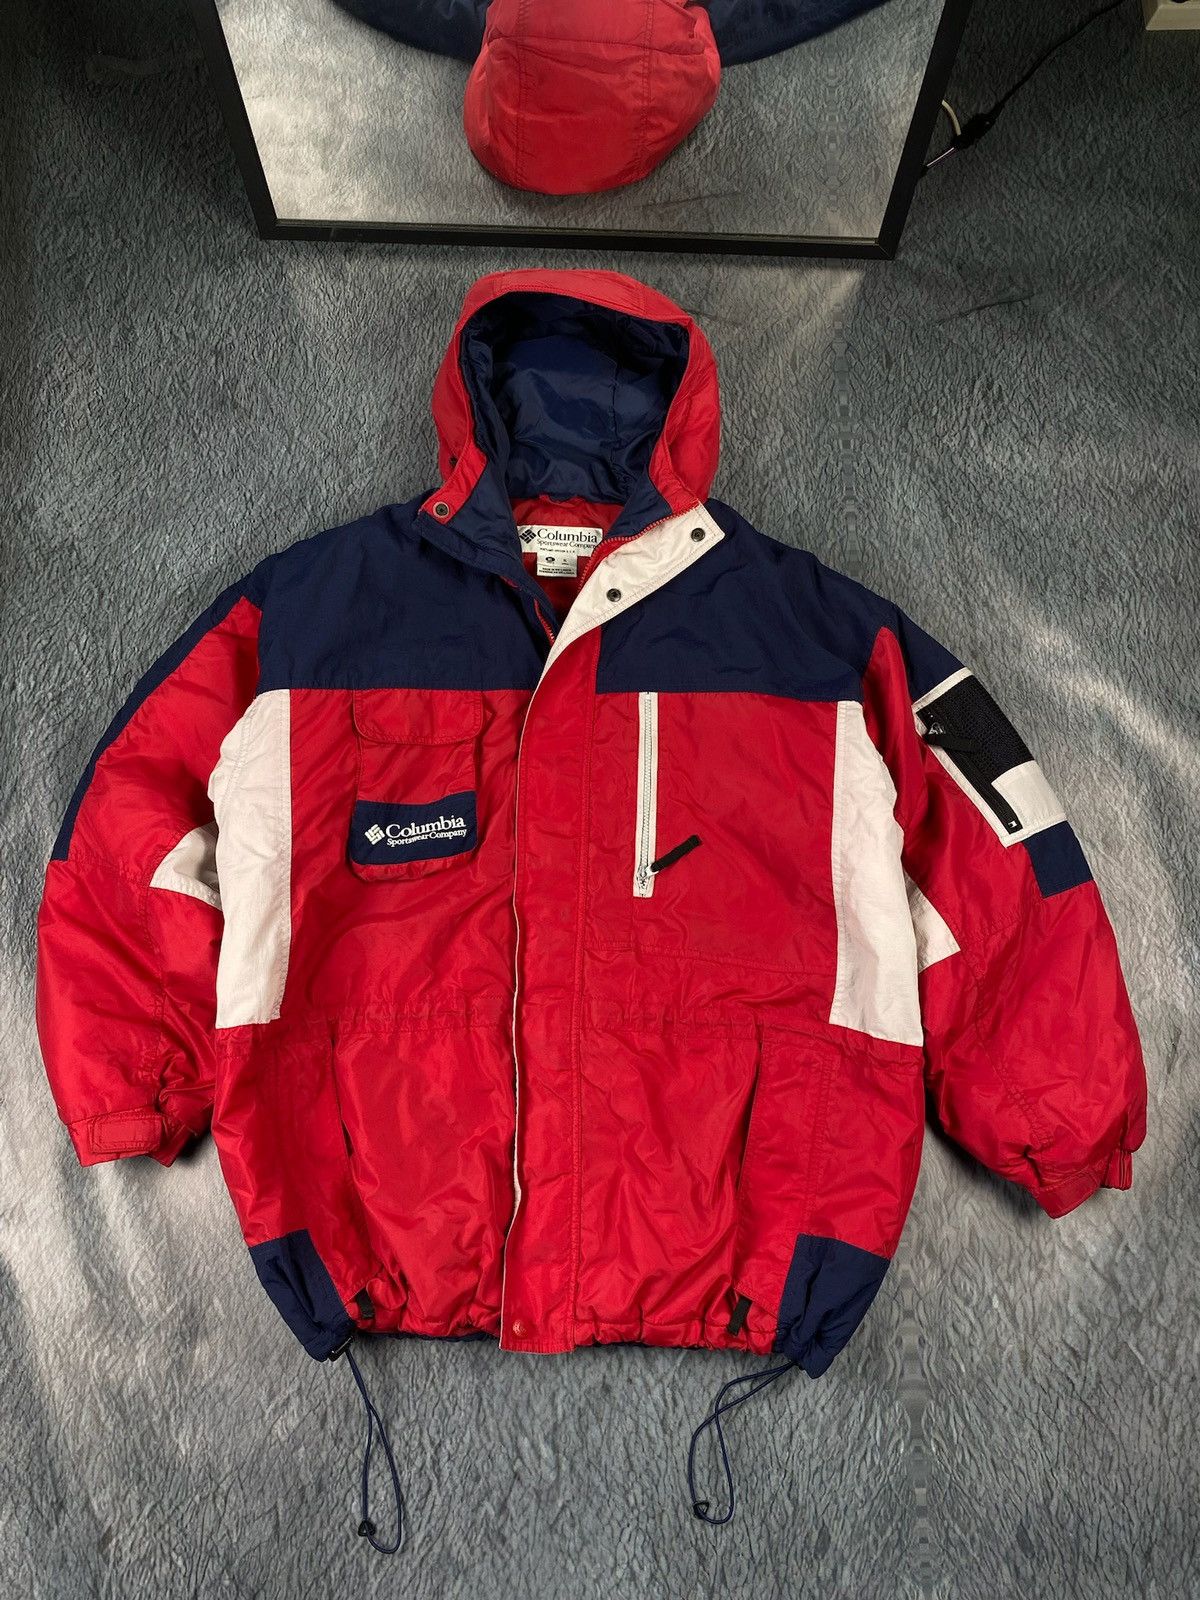 Vintage Vintage Columbia puffers Jacket Made in U.S.A😍 | Grailed